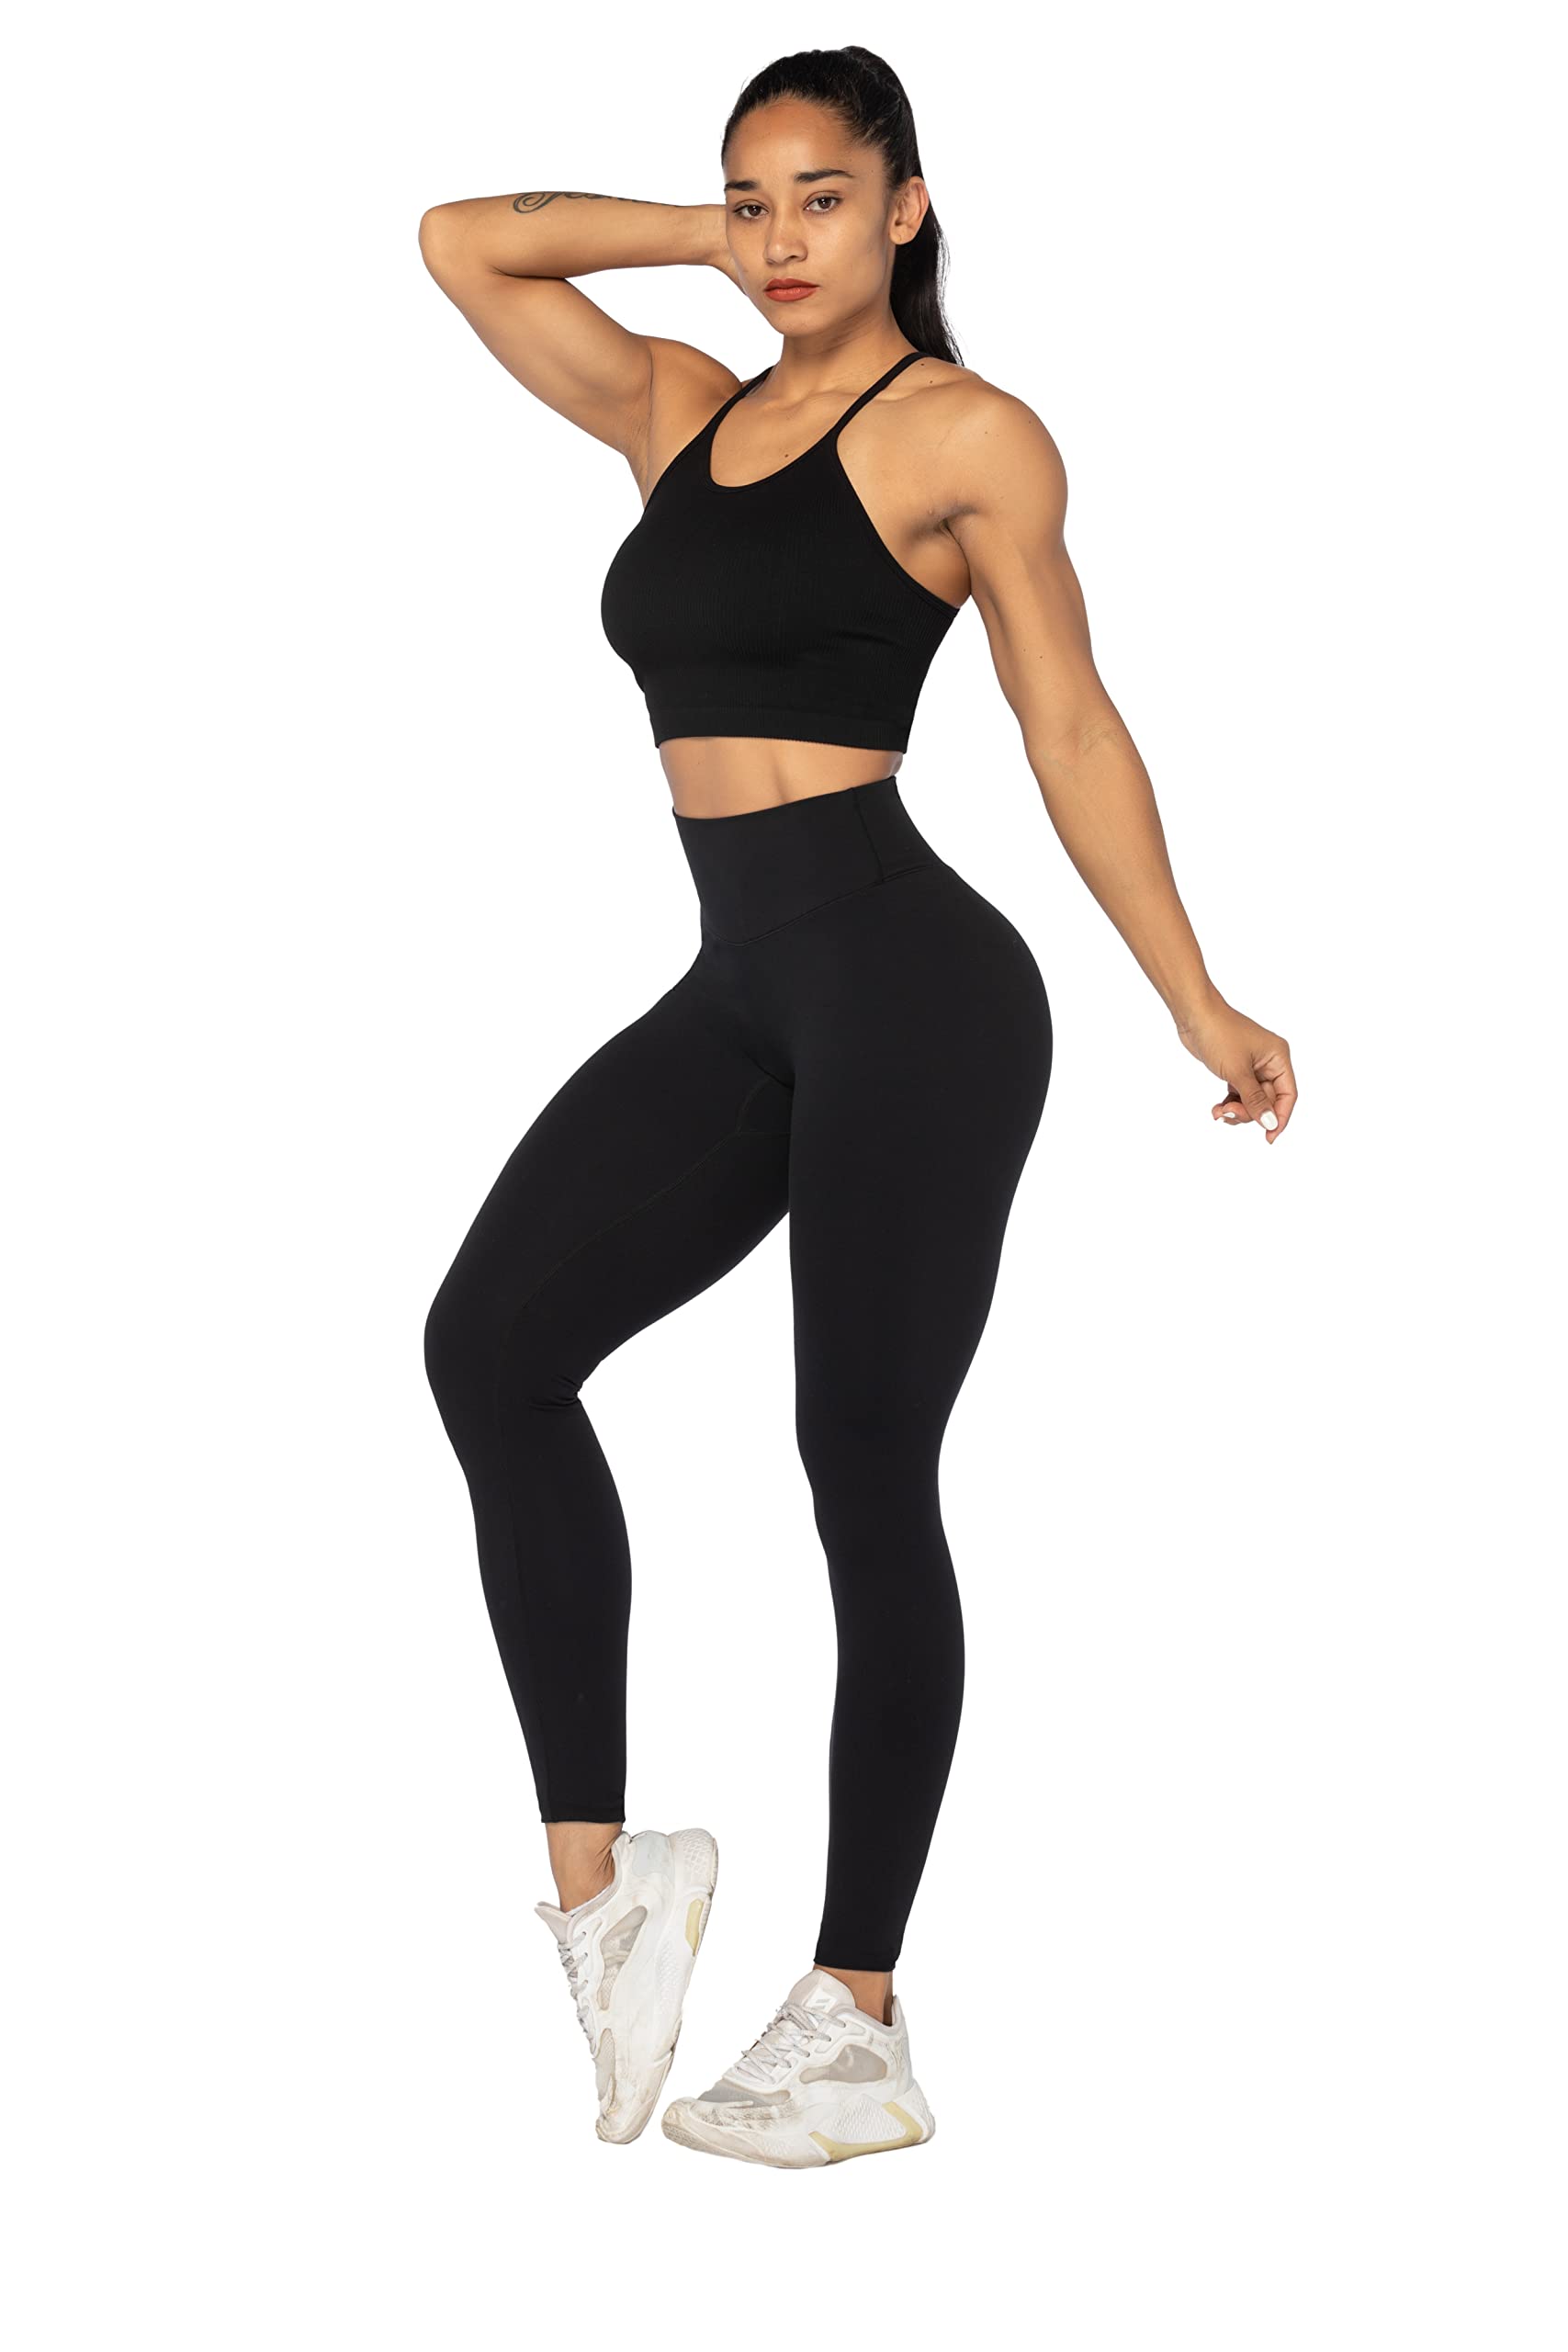 Sunzel No Front Seam Workout Leggings for Women with Pockets, High Waisted  Compression Yoga Pants with Tummy Control